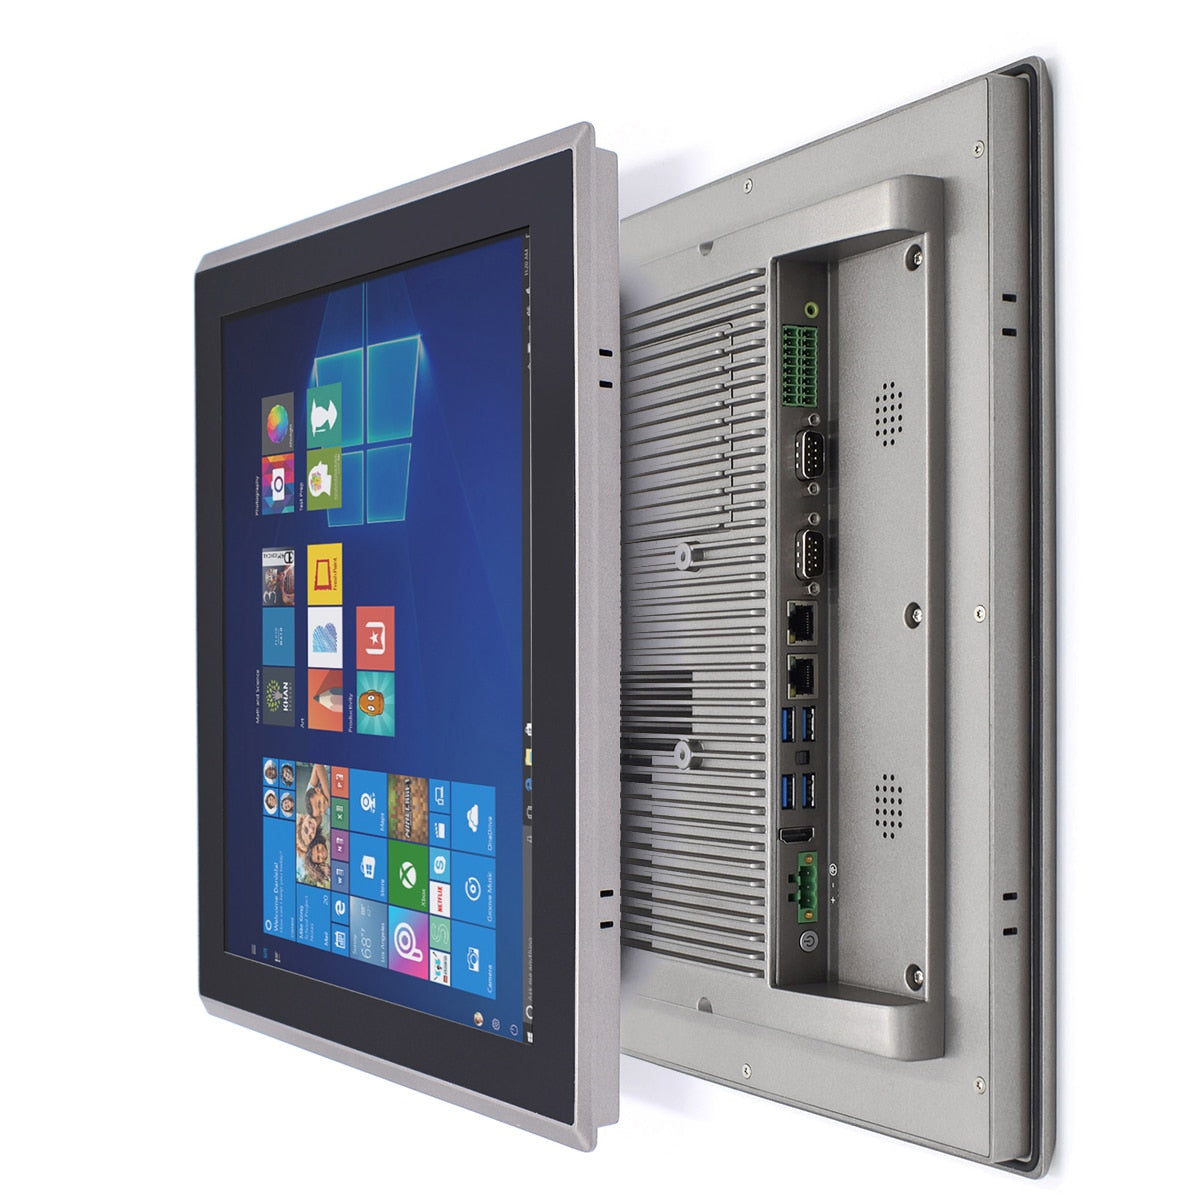 15Inch Capacitive Touch Screen Panel Industrial PC Core i7 8550U i5 8250U 2*COM 2*LAN HD LCD All In One Computer Fanless